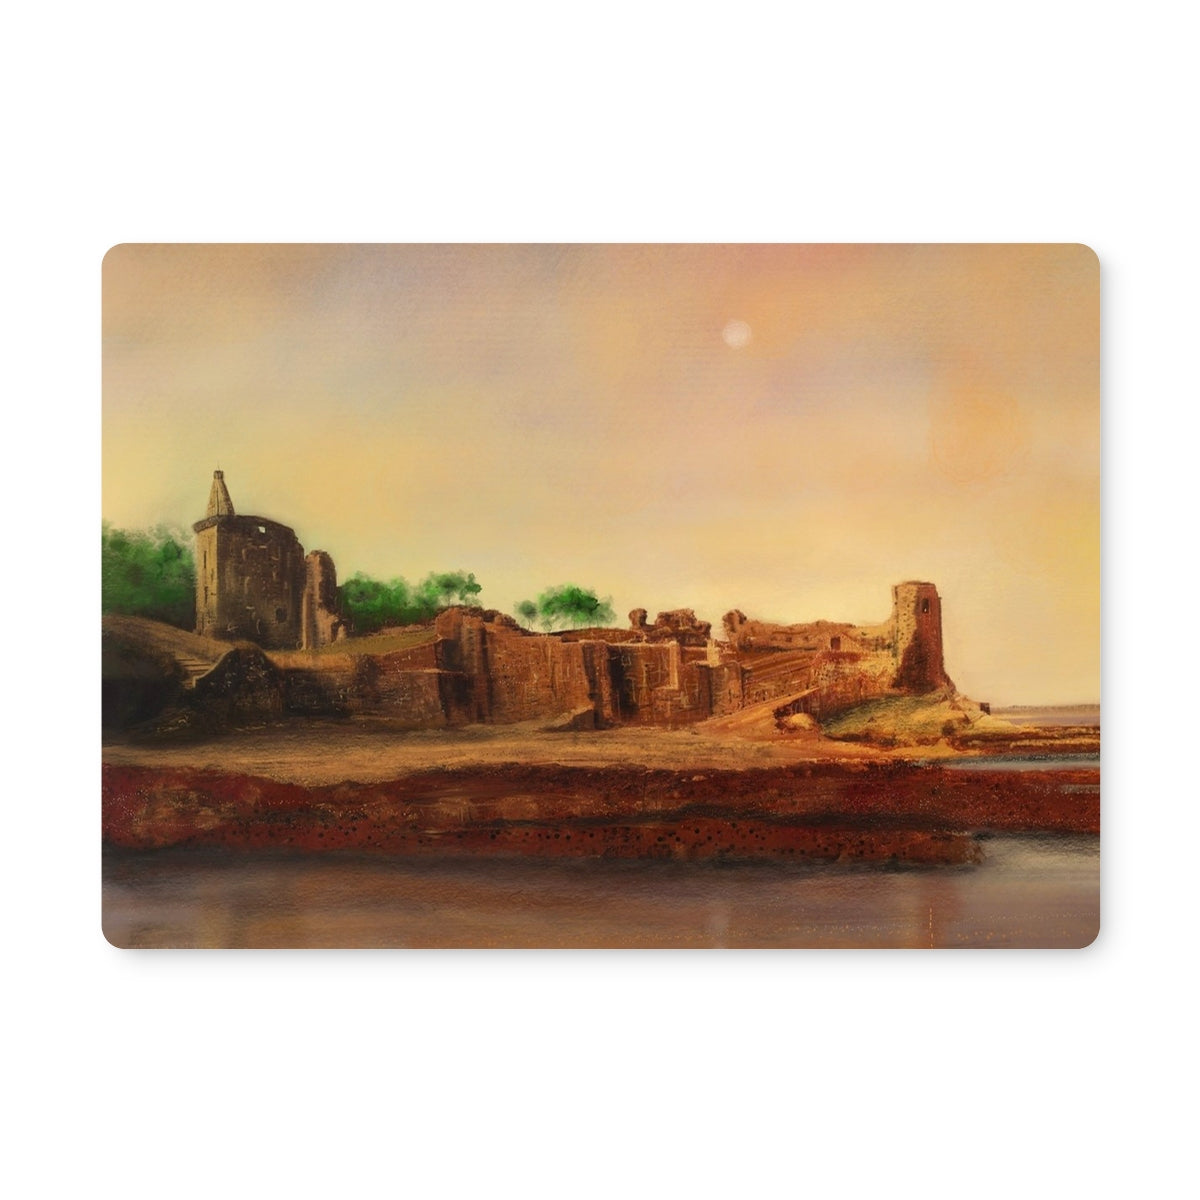 St Andrews Castle Art Gifts Placemat-Placemats-Historic & Iconic Scotland Art Gallery-2 Placemats-Paintings, Prints, Homeware, Art Gifts From Scotland By Scottish Artist Kevin Hunter